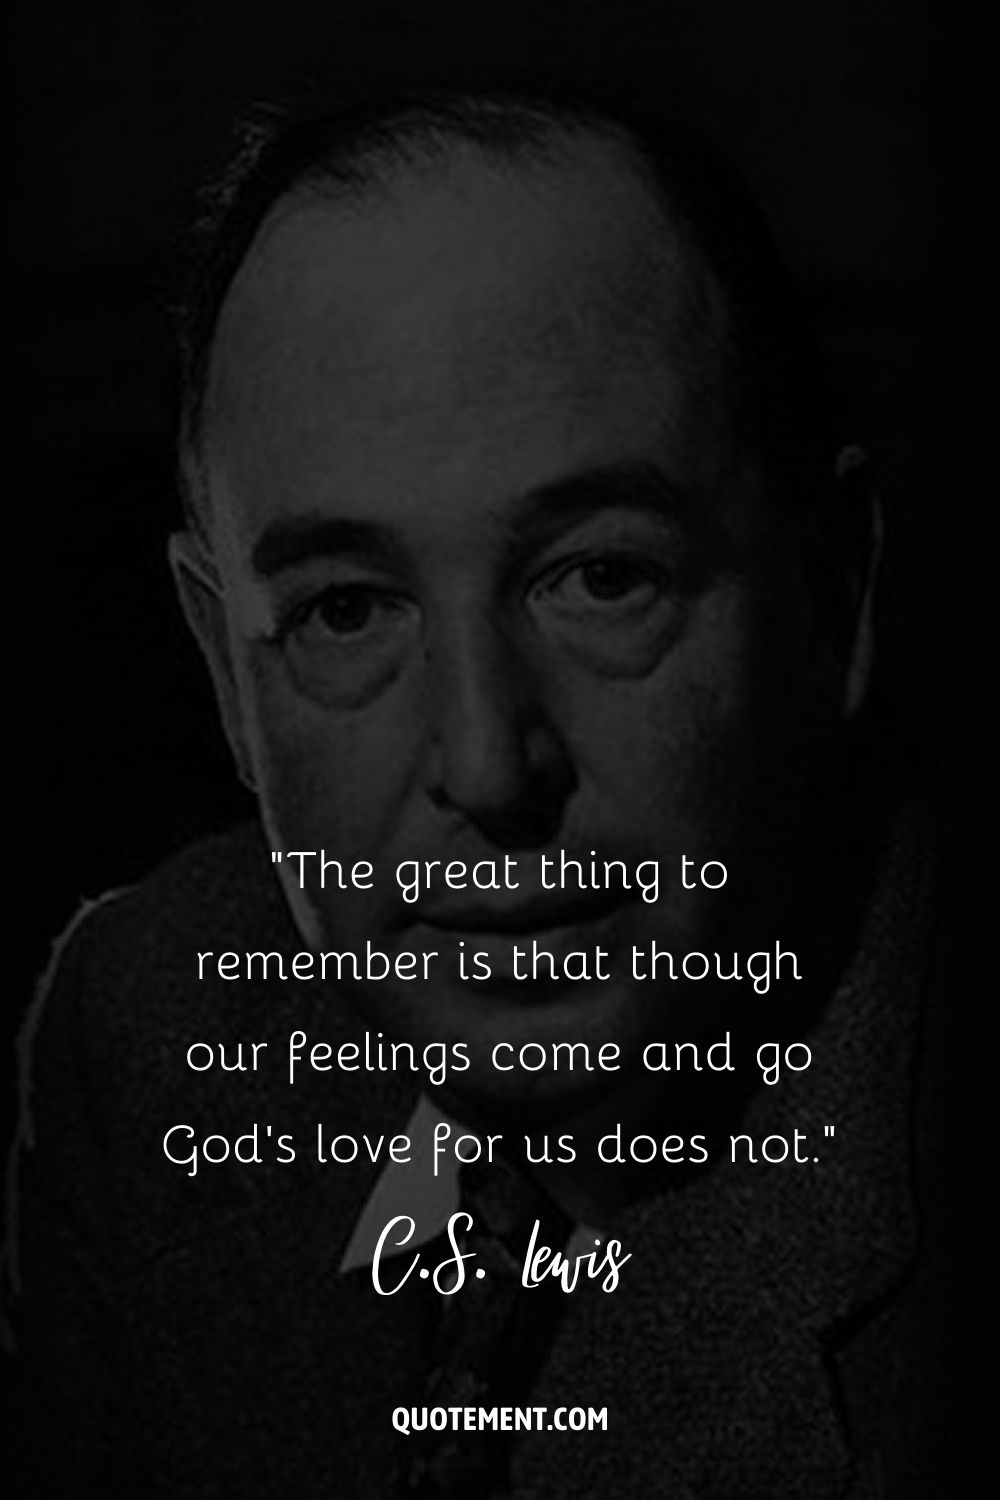 C.S. Lewis exudes poise in grayscale, dressed in a coat and tie